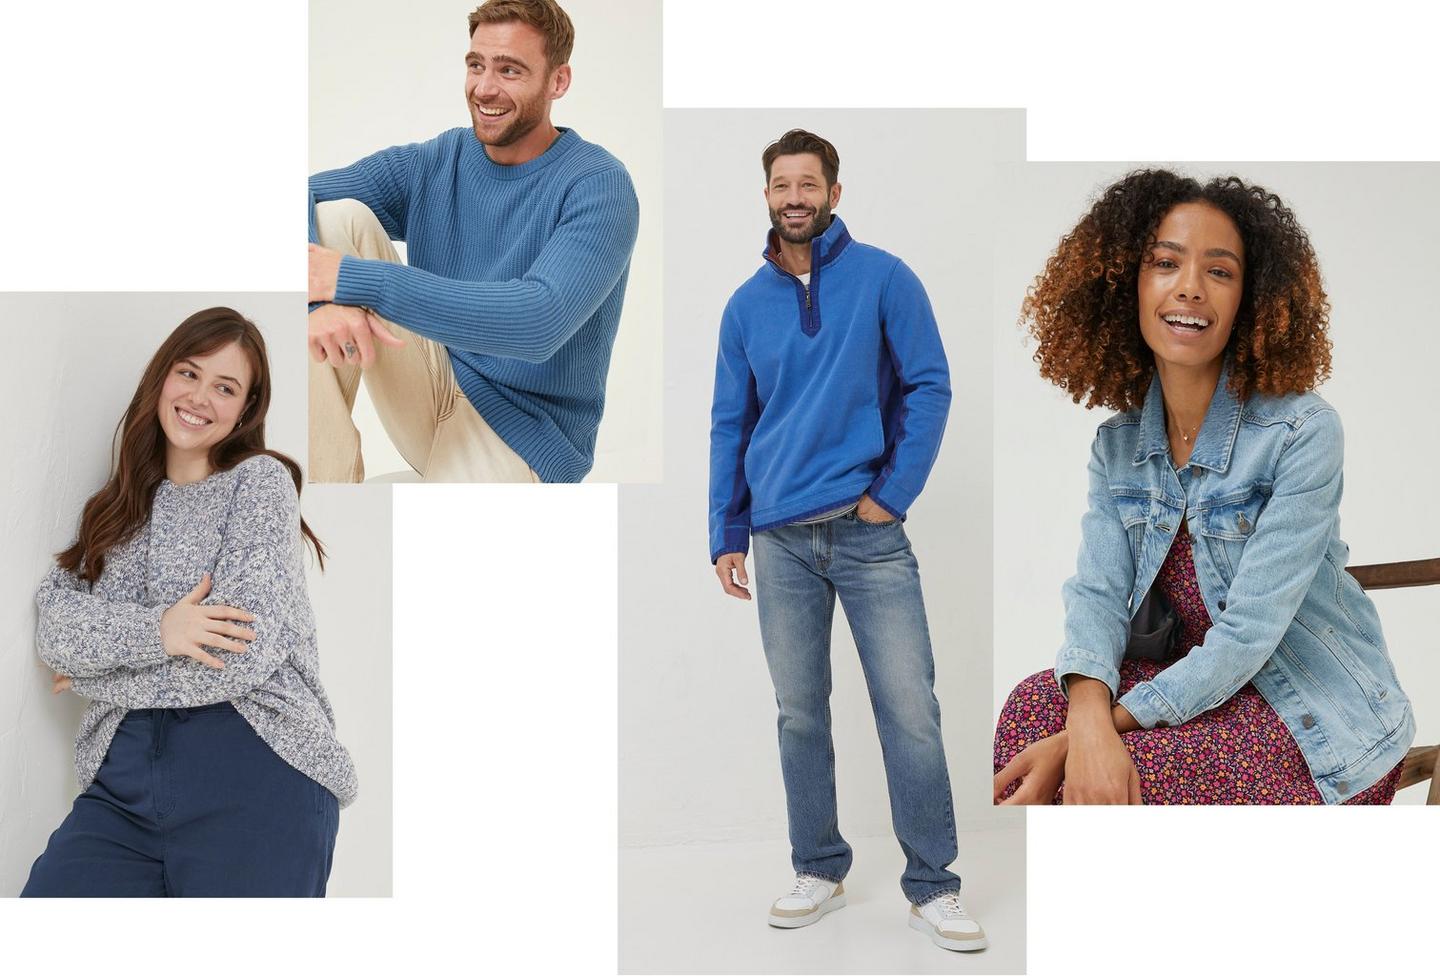 Women & men wearing a variety of blue clothing including sweaters, joggers, a pique cotton sweatshirt, jeans & a denim jacket.